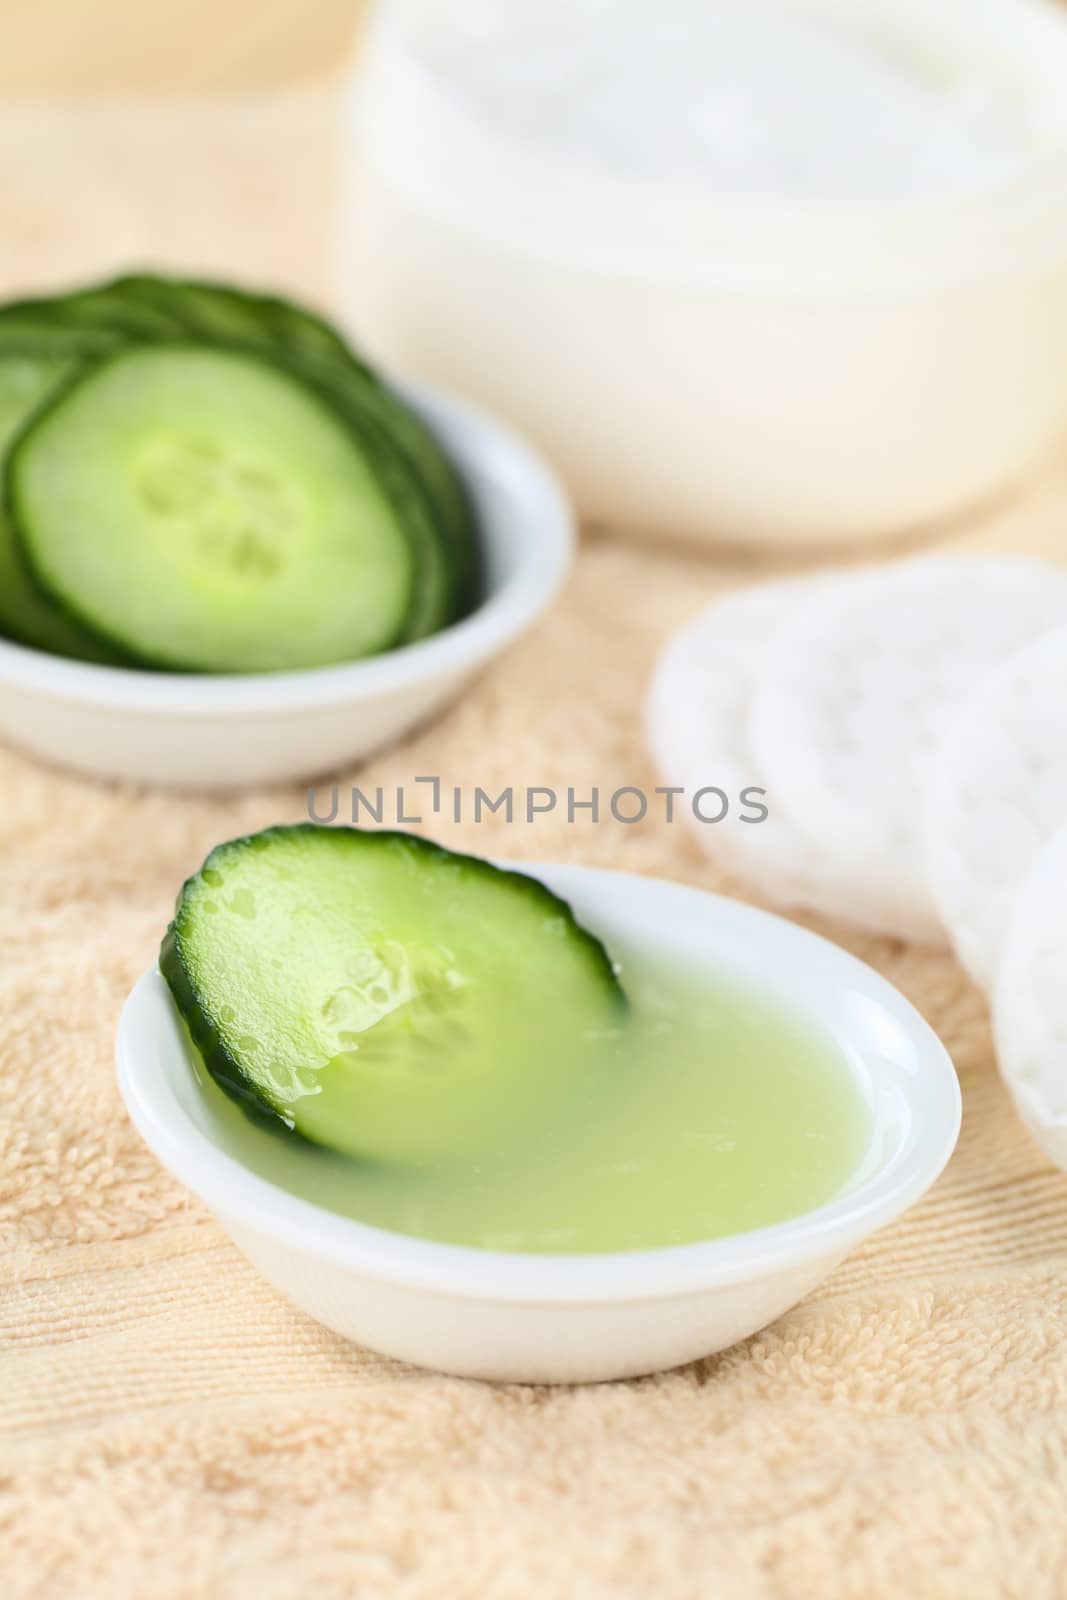 Homemade natural cucumber facial toner that hydrates, softens, soothes and cleanses the skin in a bowl with a cucumber slice, with facial pads and cream on towel (Selective Focus, Focus on the front of the cucumber slice in the toner)